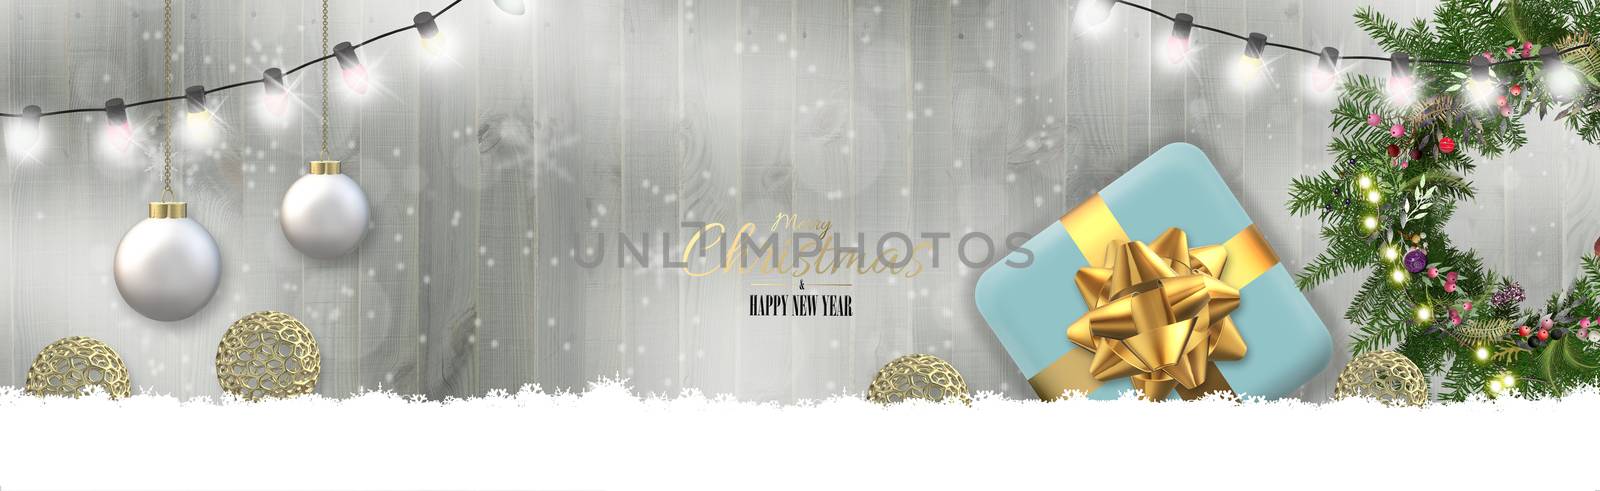 Christmas banner on wood with Xmas realistic gift box, snow, Xmas wreath, gold ornament on wooden background. Horizontal 3D render. Party invitation, place for text. Beautiful rustic festive design